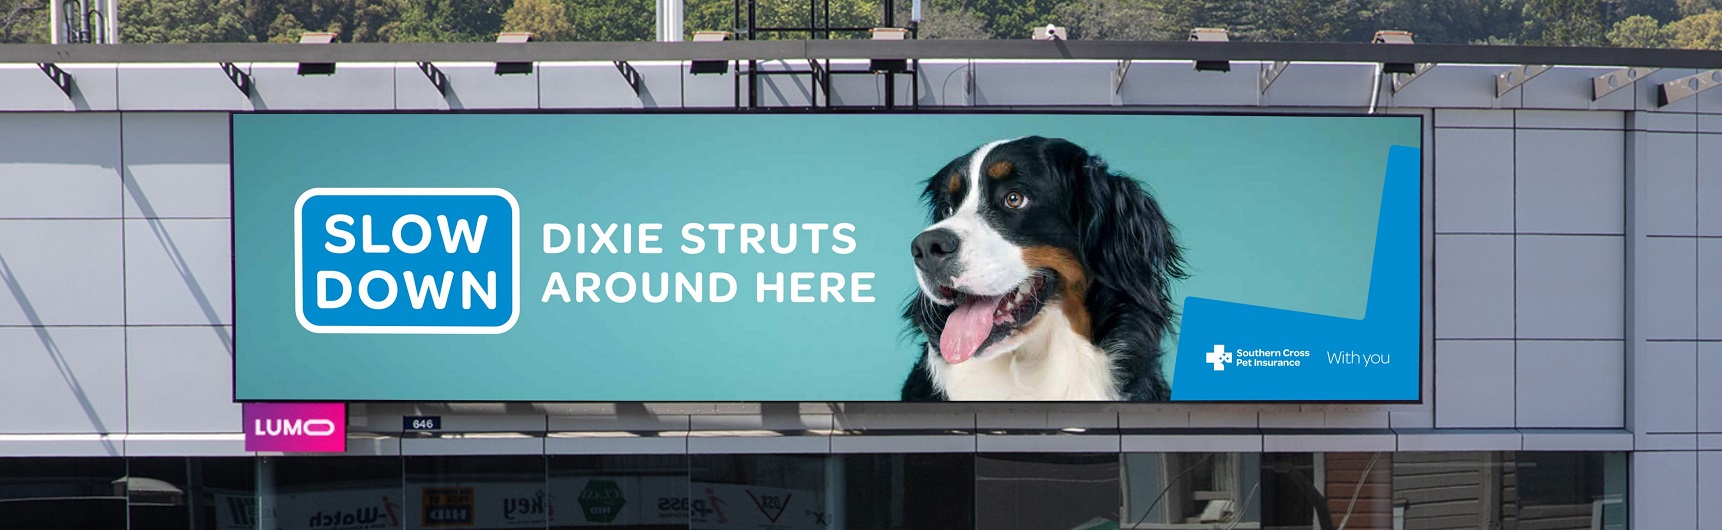 Photo of a billboard telling drivers to slow down and watch for pets